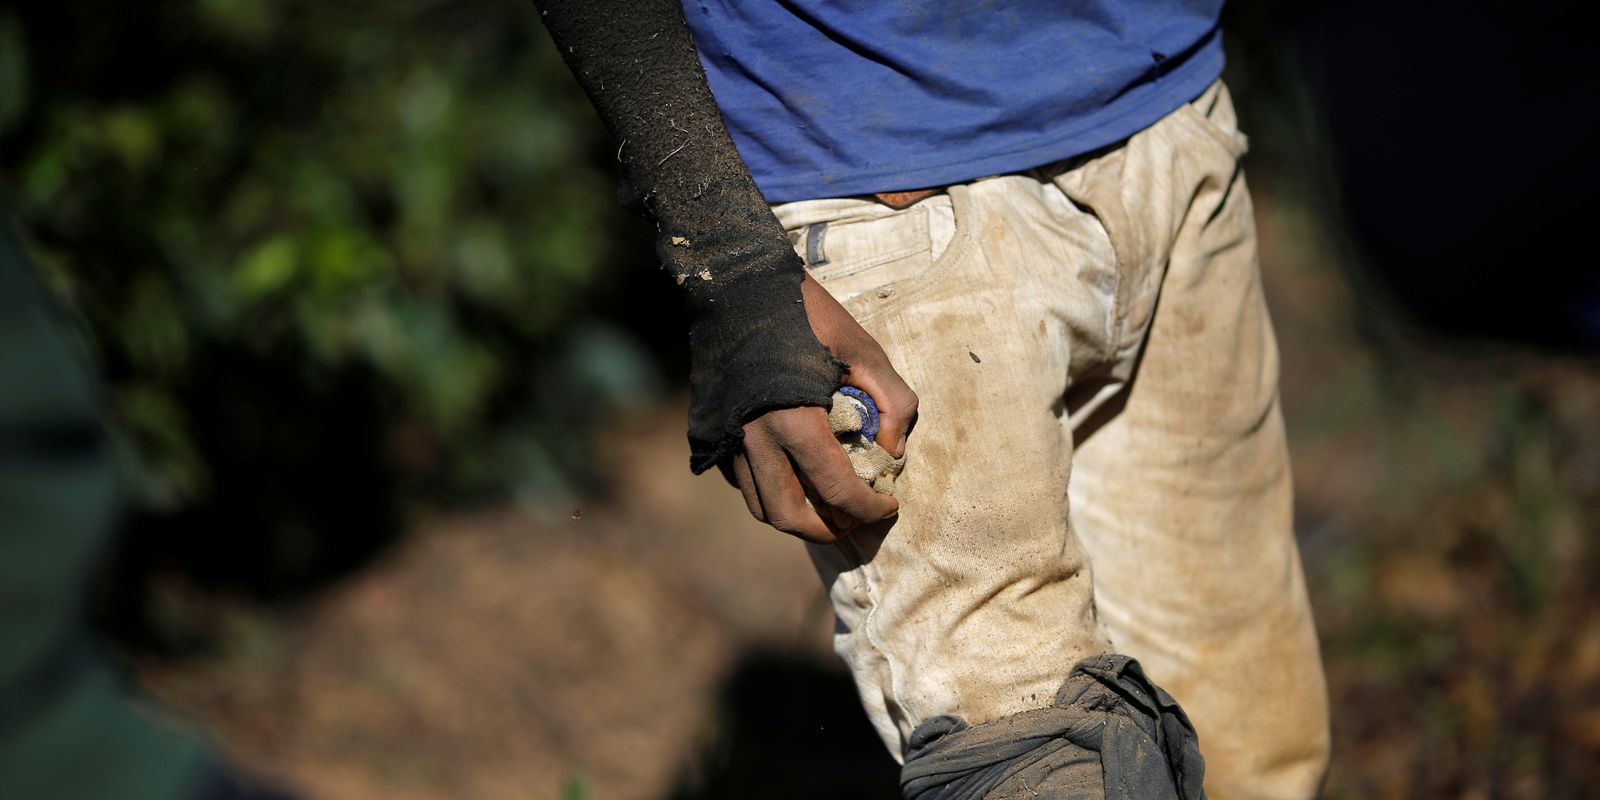 Worker is seen in a coffee farm during a labor ministry operation to identify workers in conditions analogous to slavery, in Campos Altos